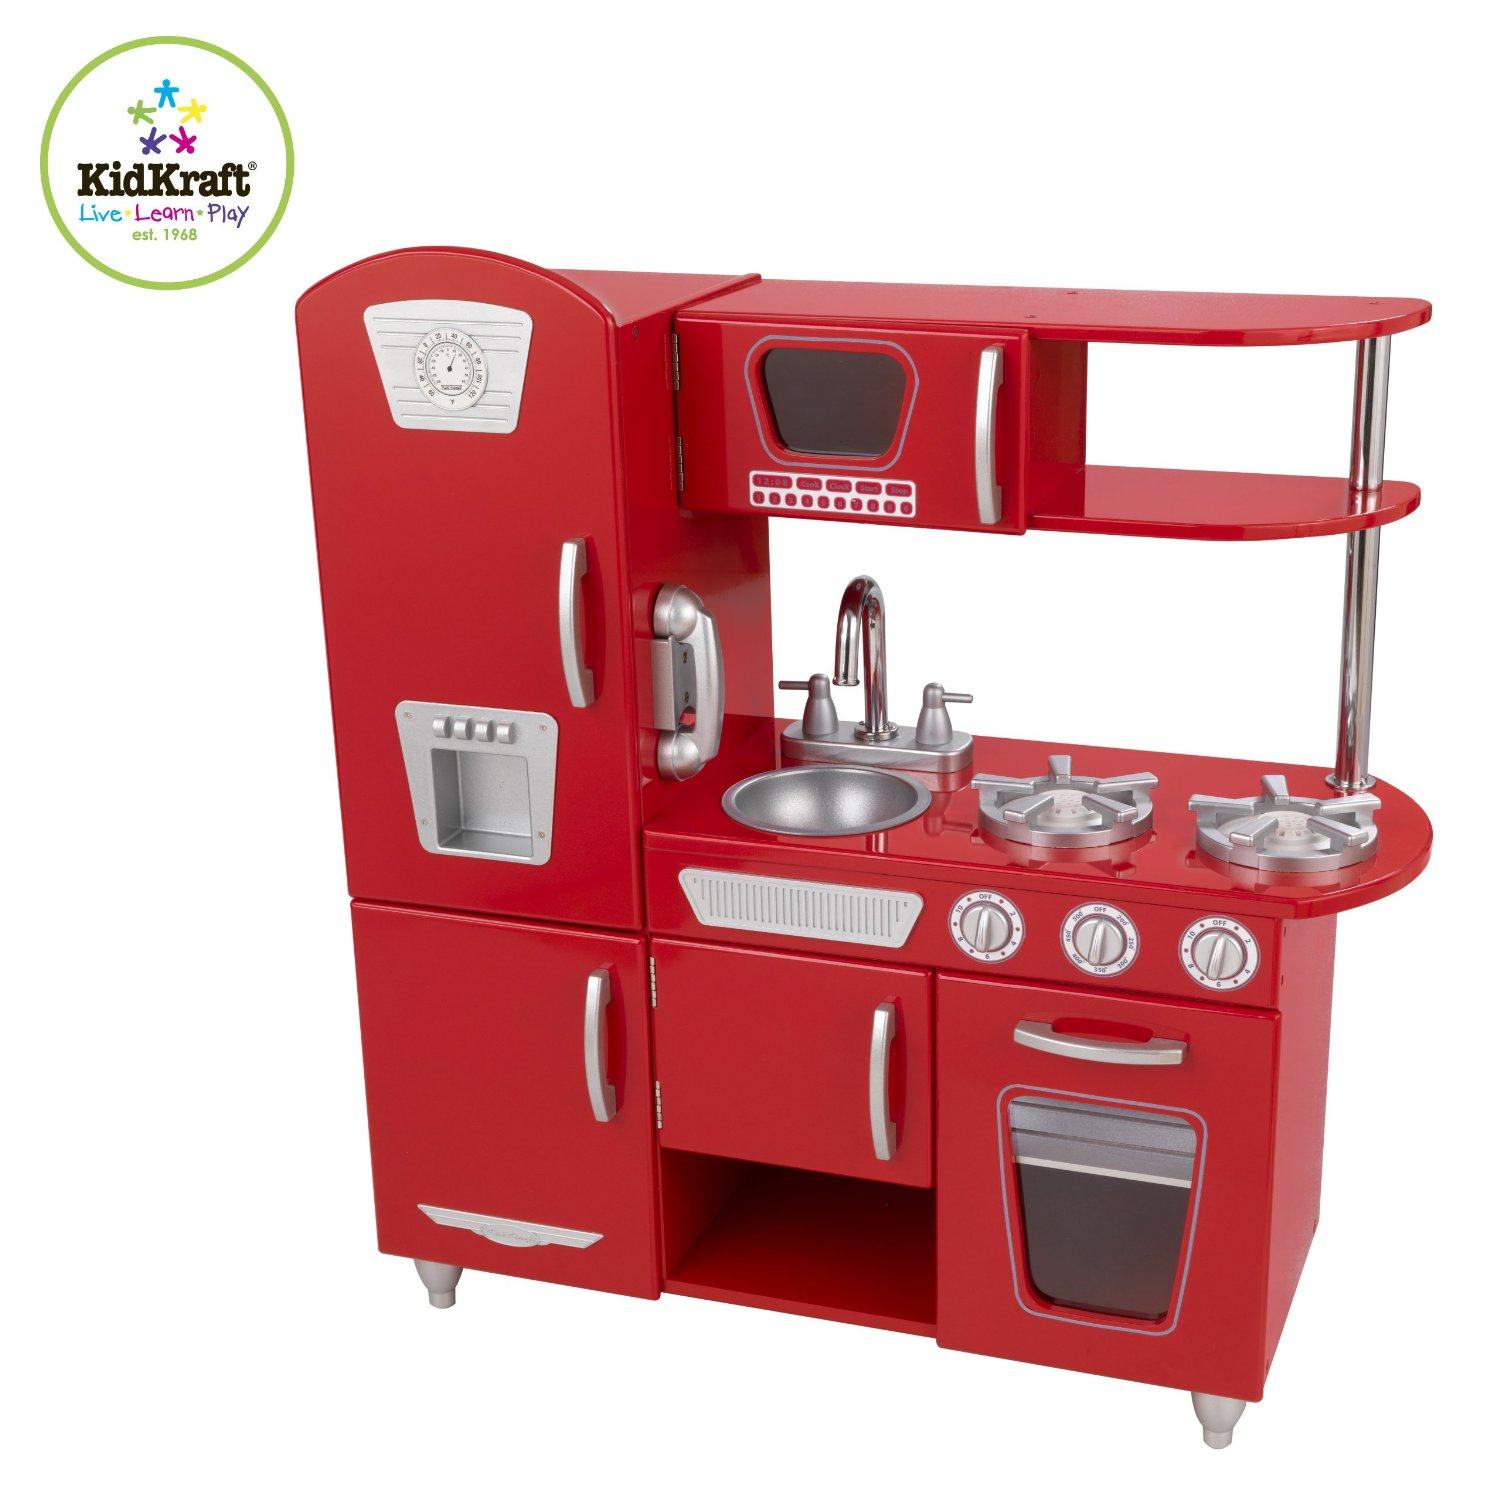 Get the Red or Pink Retro Kitchen For Only $78.99 Shipped!